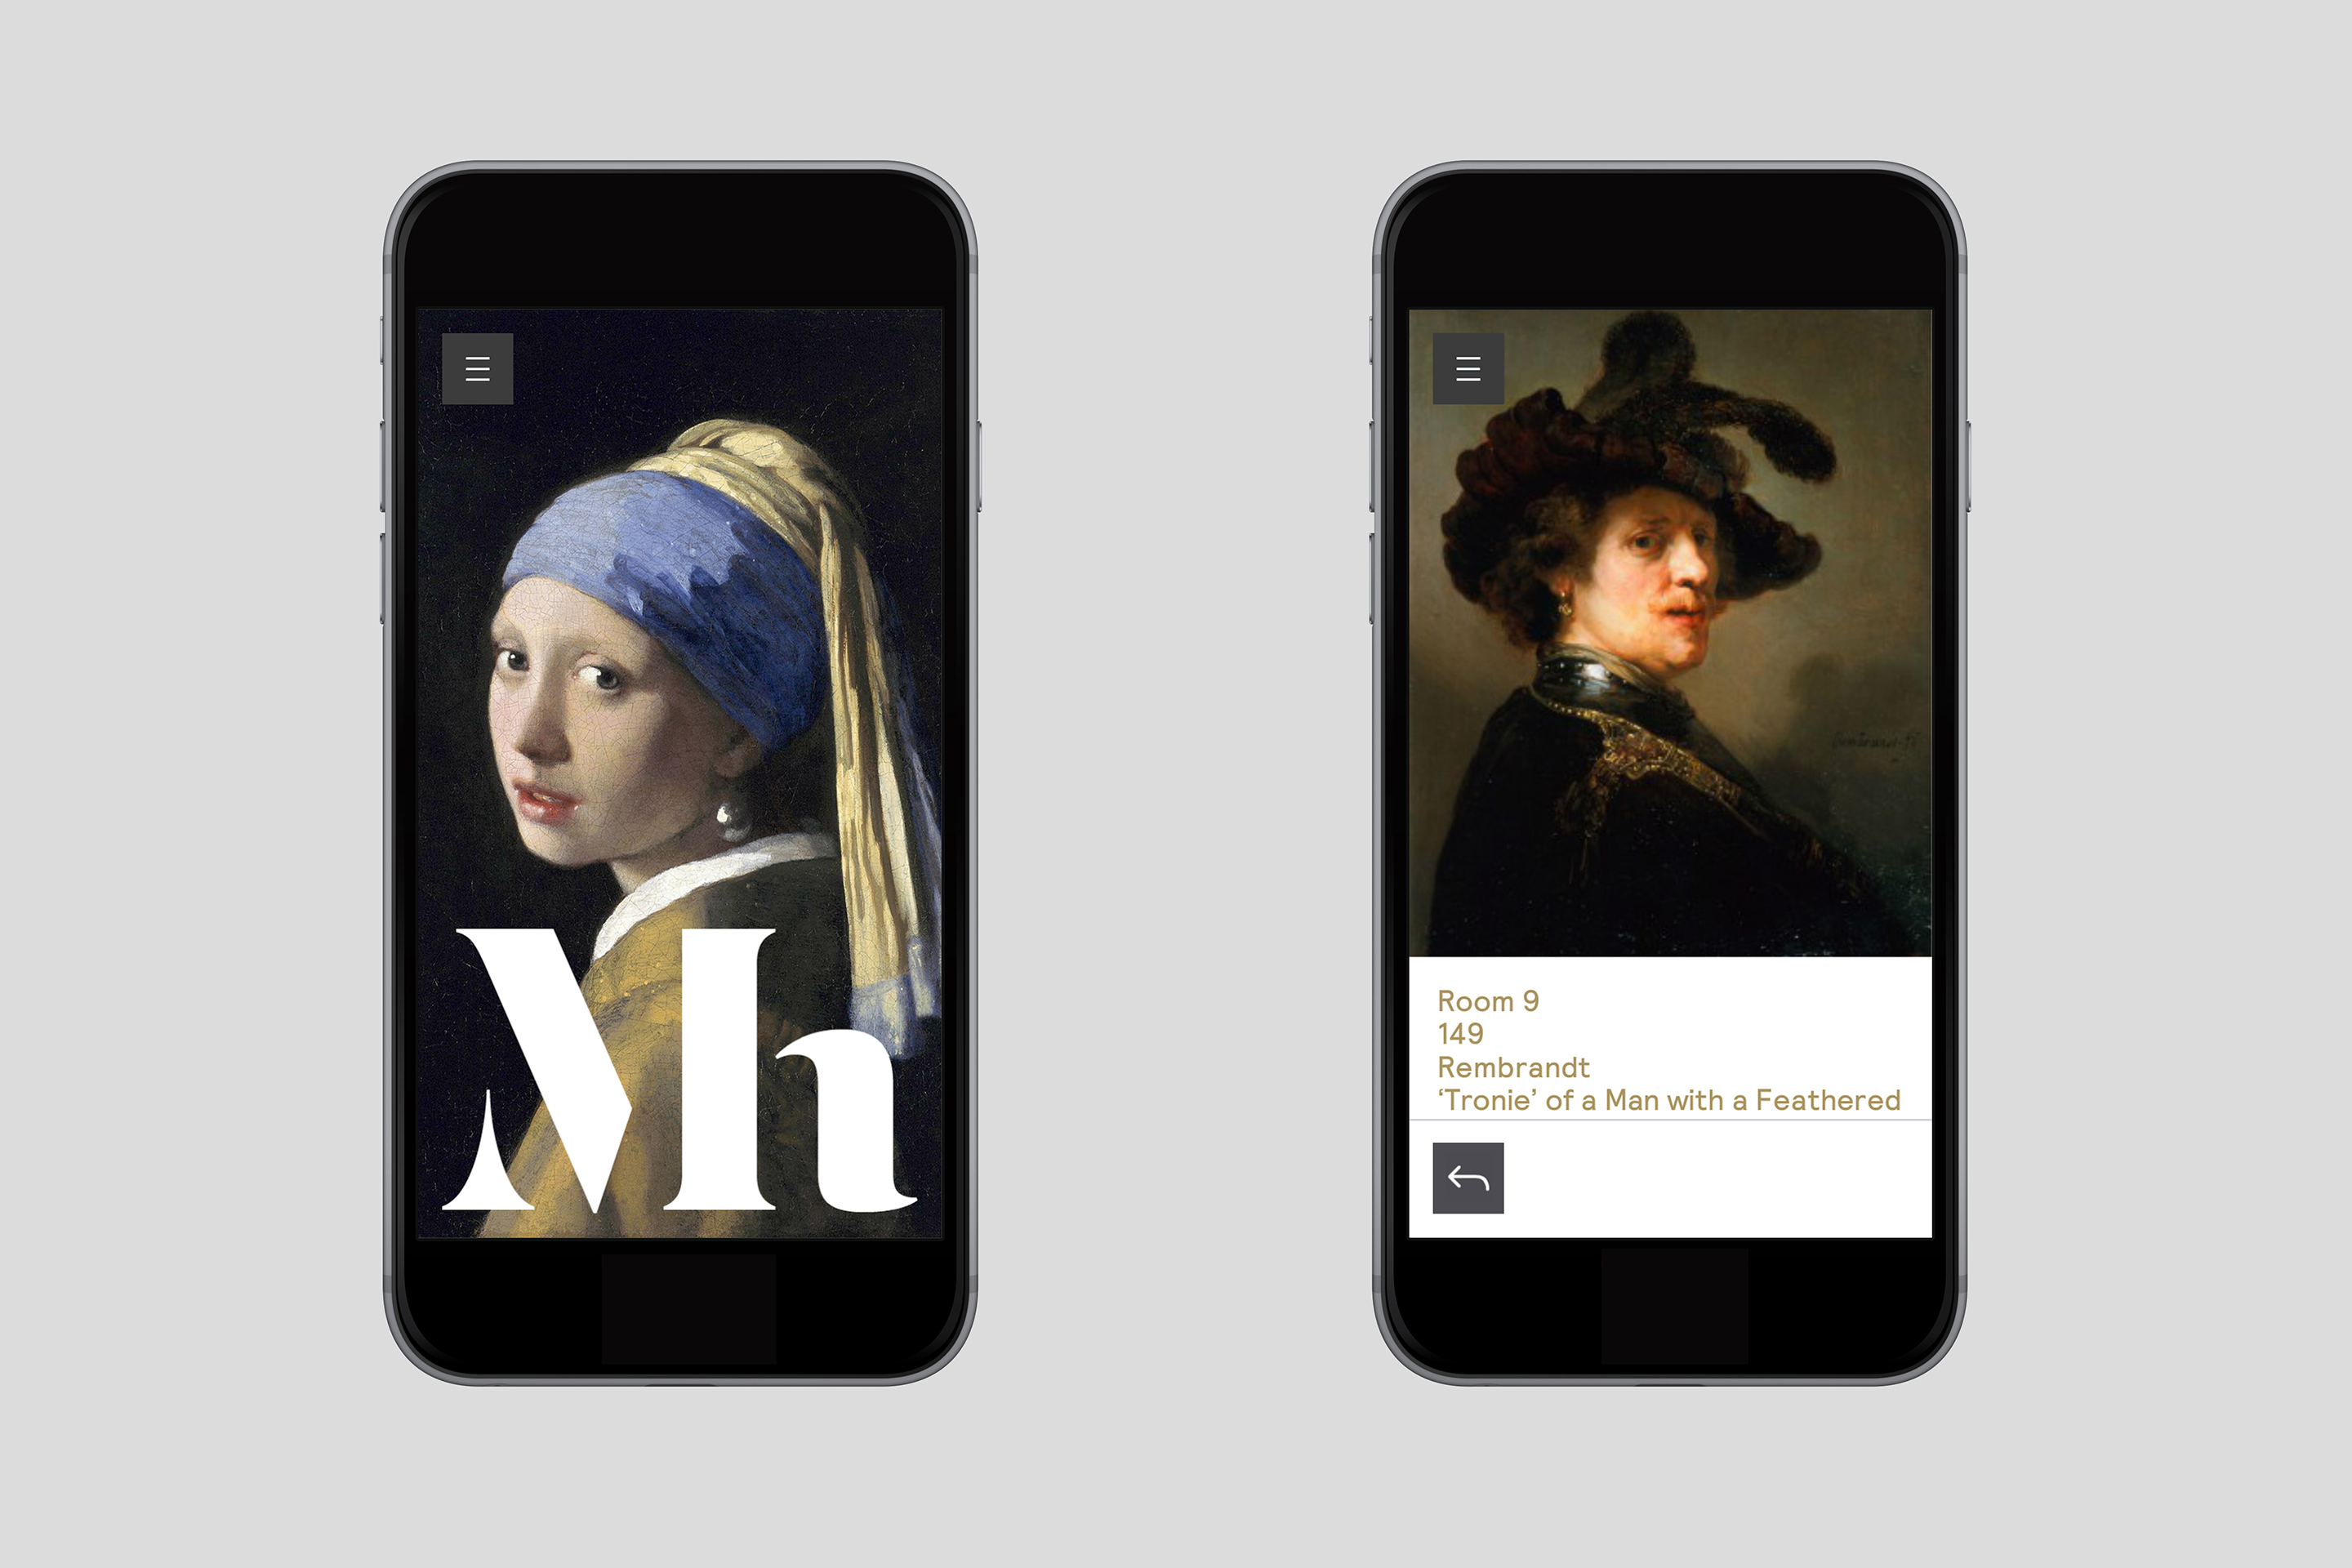 studio dumbar design visual brand identity for Mauritshuis Royal Picture Gallery mobile app design